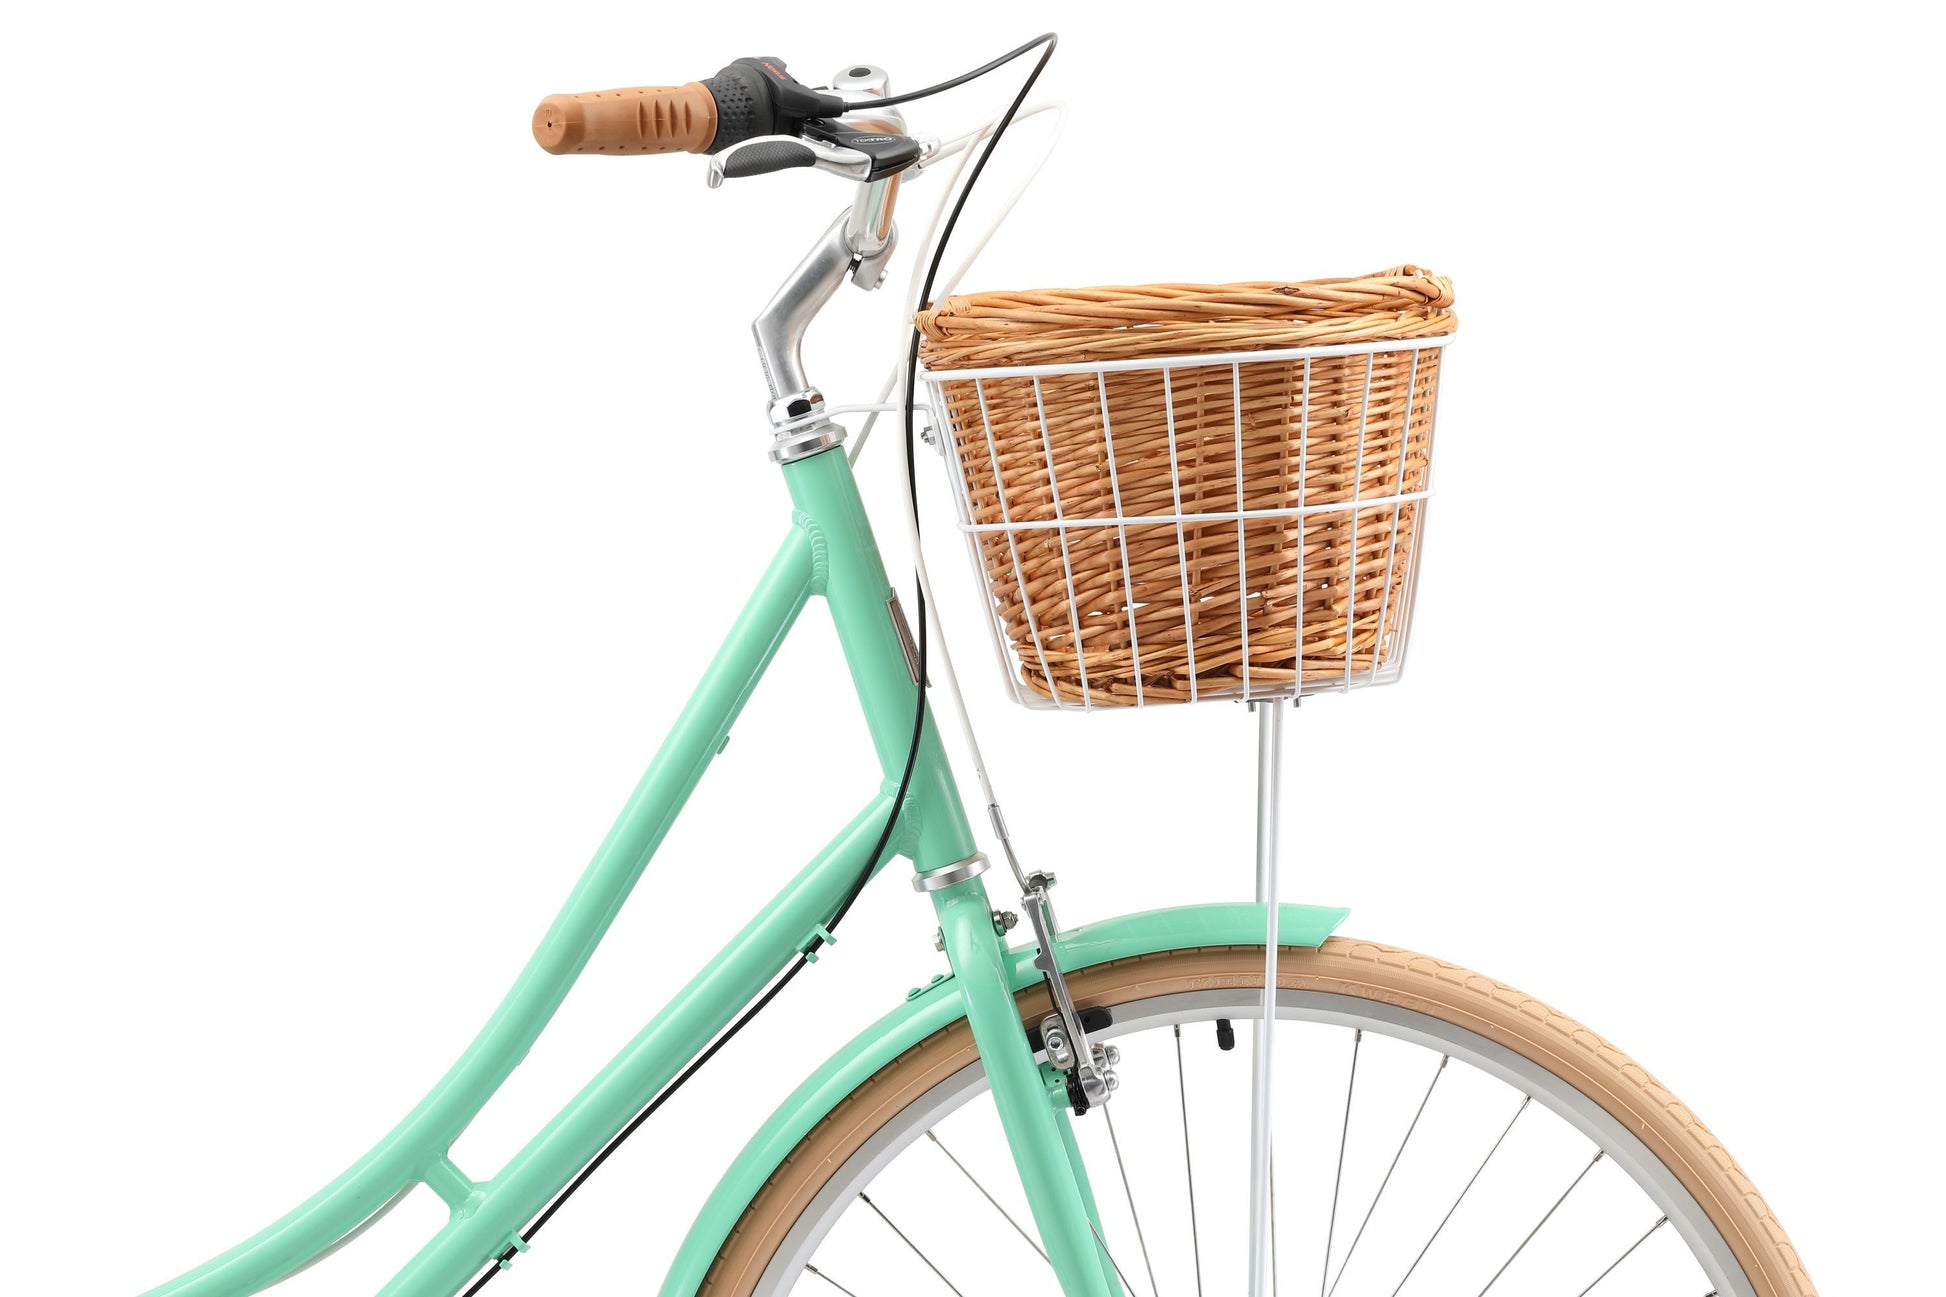 Ladies Deluxe Vintage Bike in Mint Green showing Shimano shifters and Tektro brake levers from Reid Cycles Australia